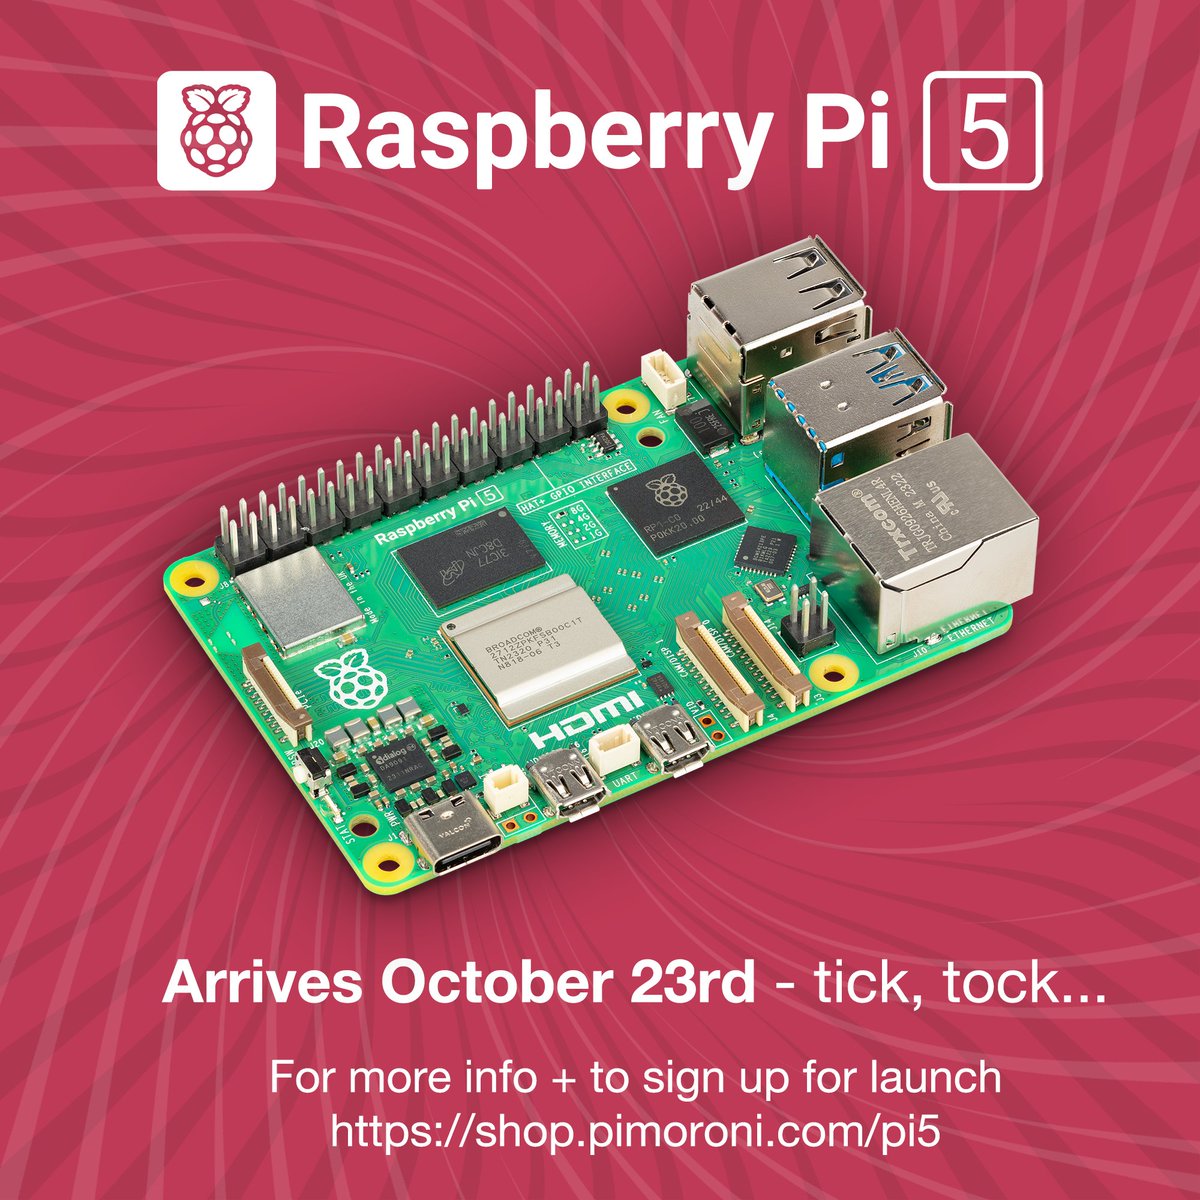 This isn't the greatest Pi launch in the world, it's just a tribute. Coming October 23rd, the all-new Raspberry Pi 5! Read all about it and sign up for launch here: shop.pimoroni.com/pi5